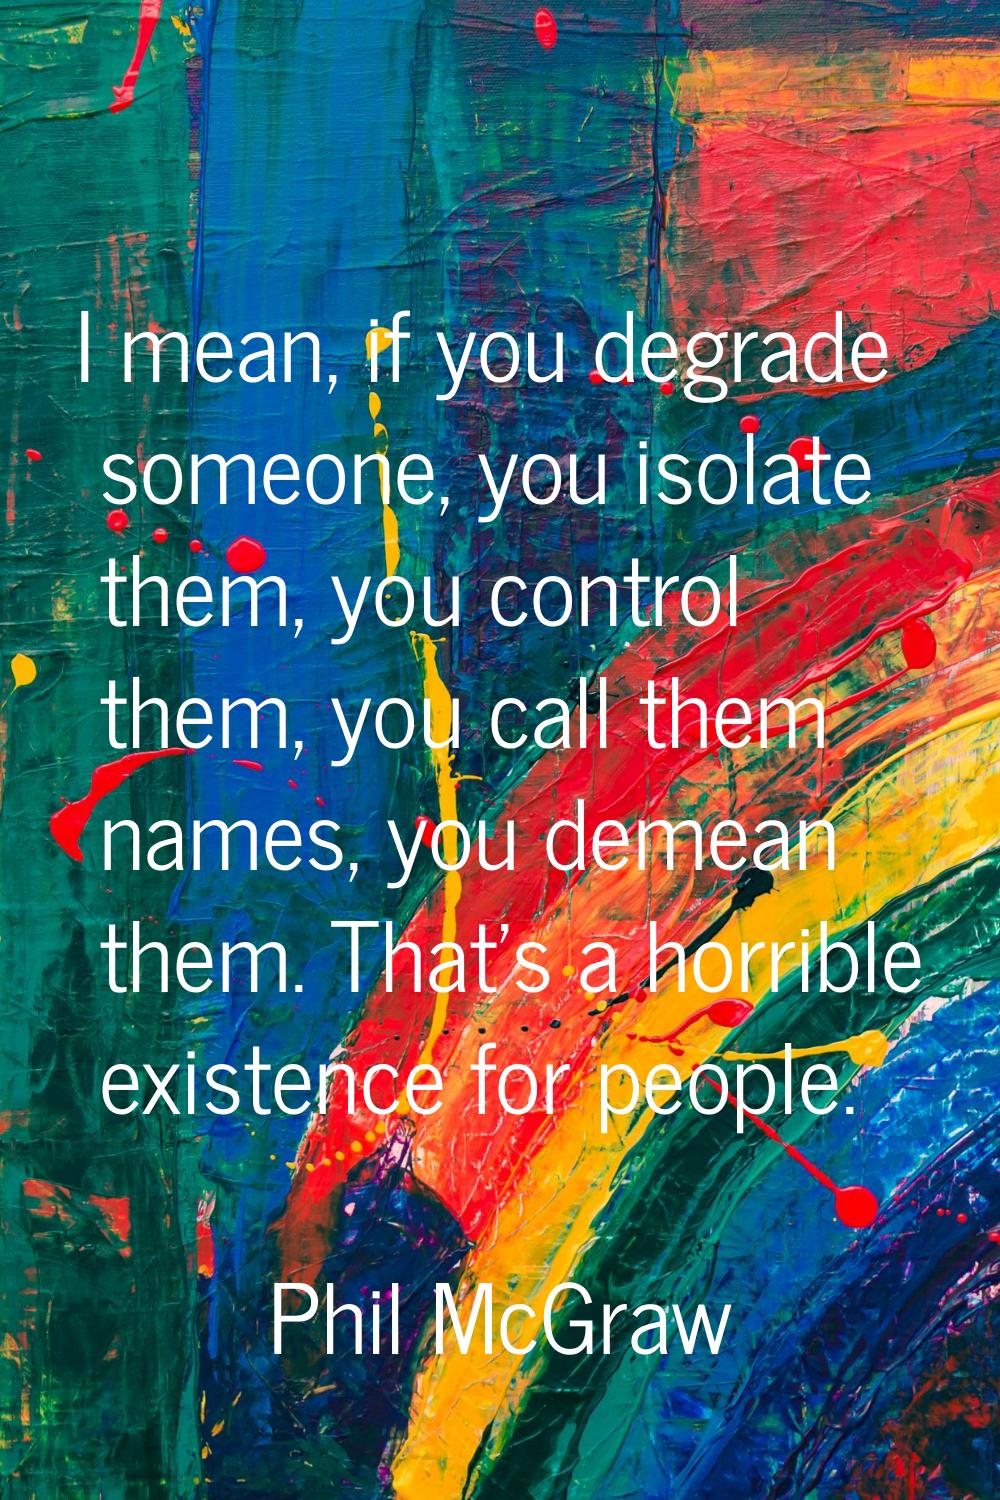 I mean, if you degrade someone, you isolate them, you control them, you call them names, you demean